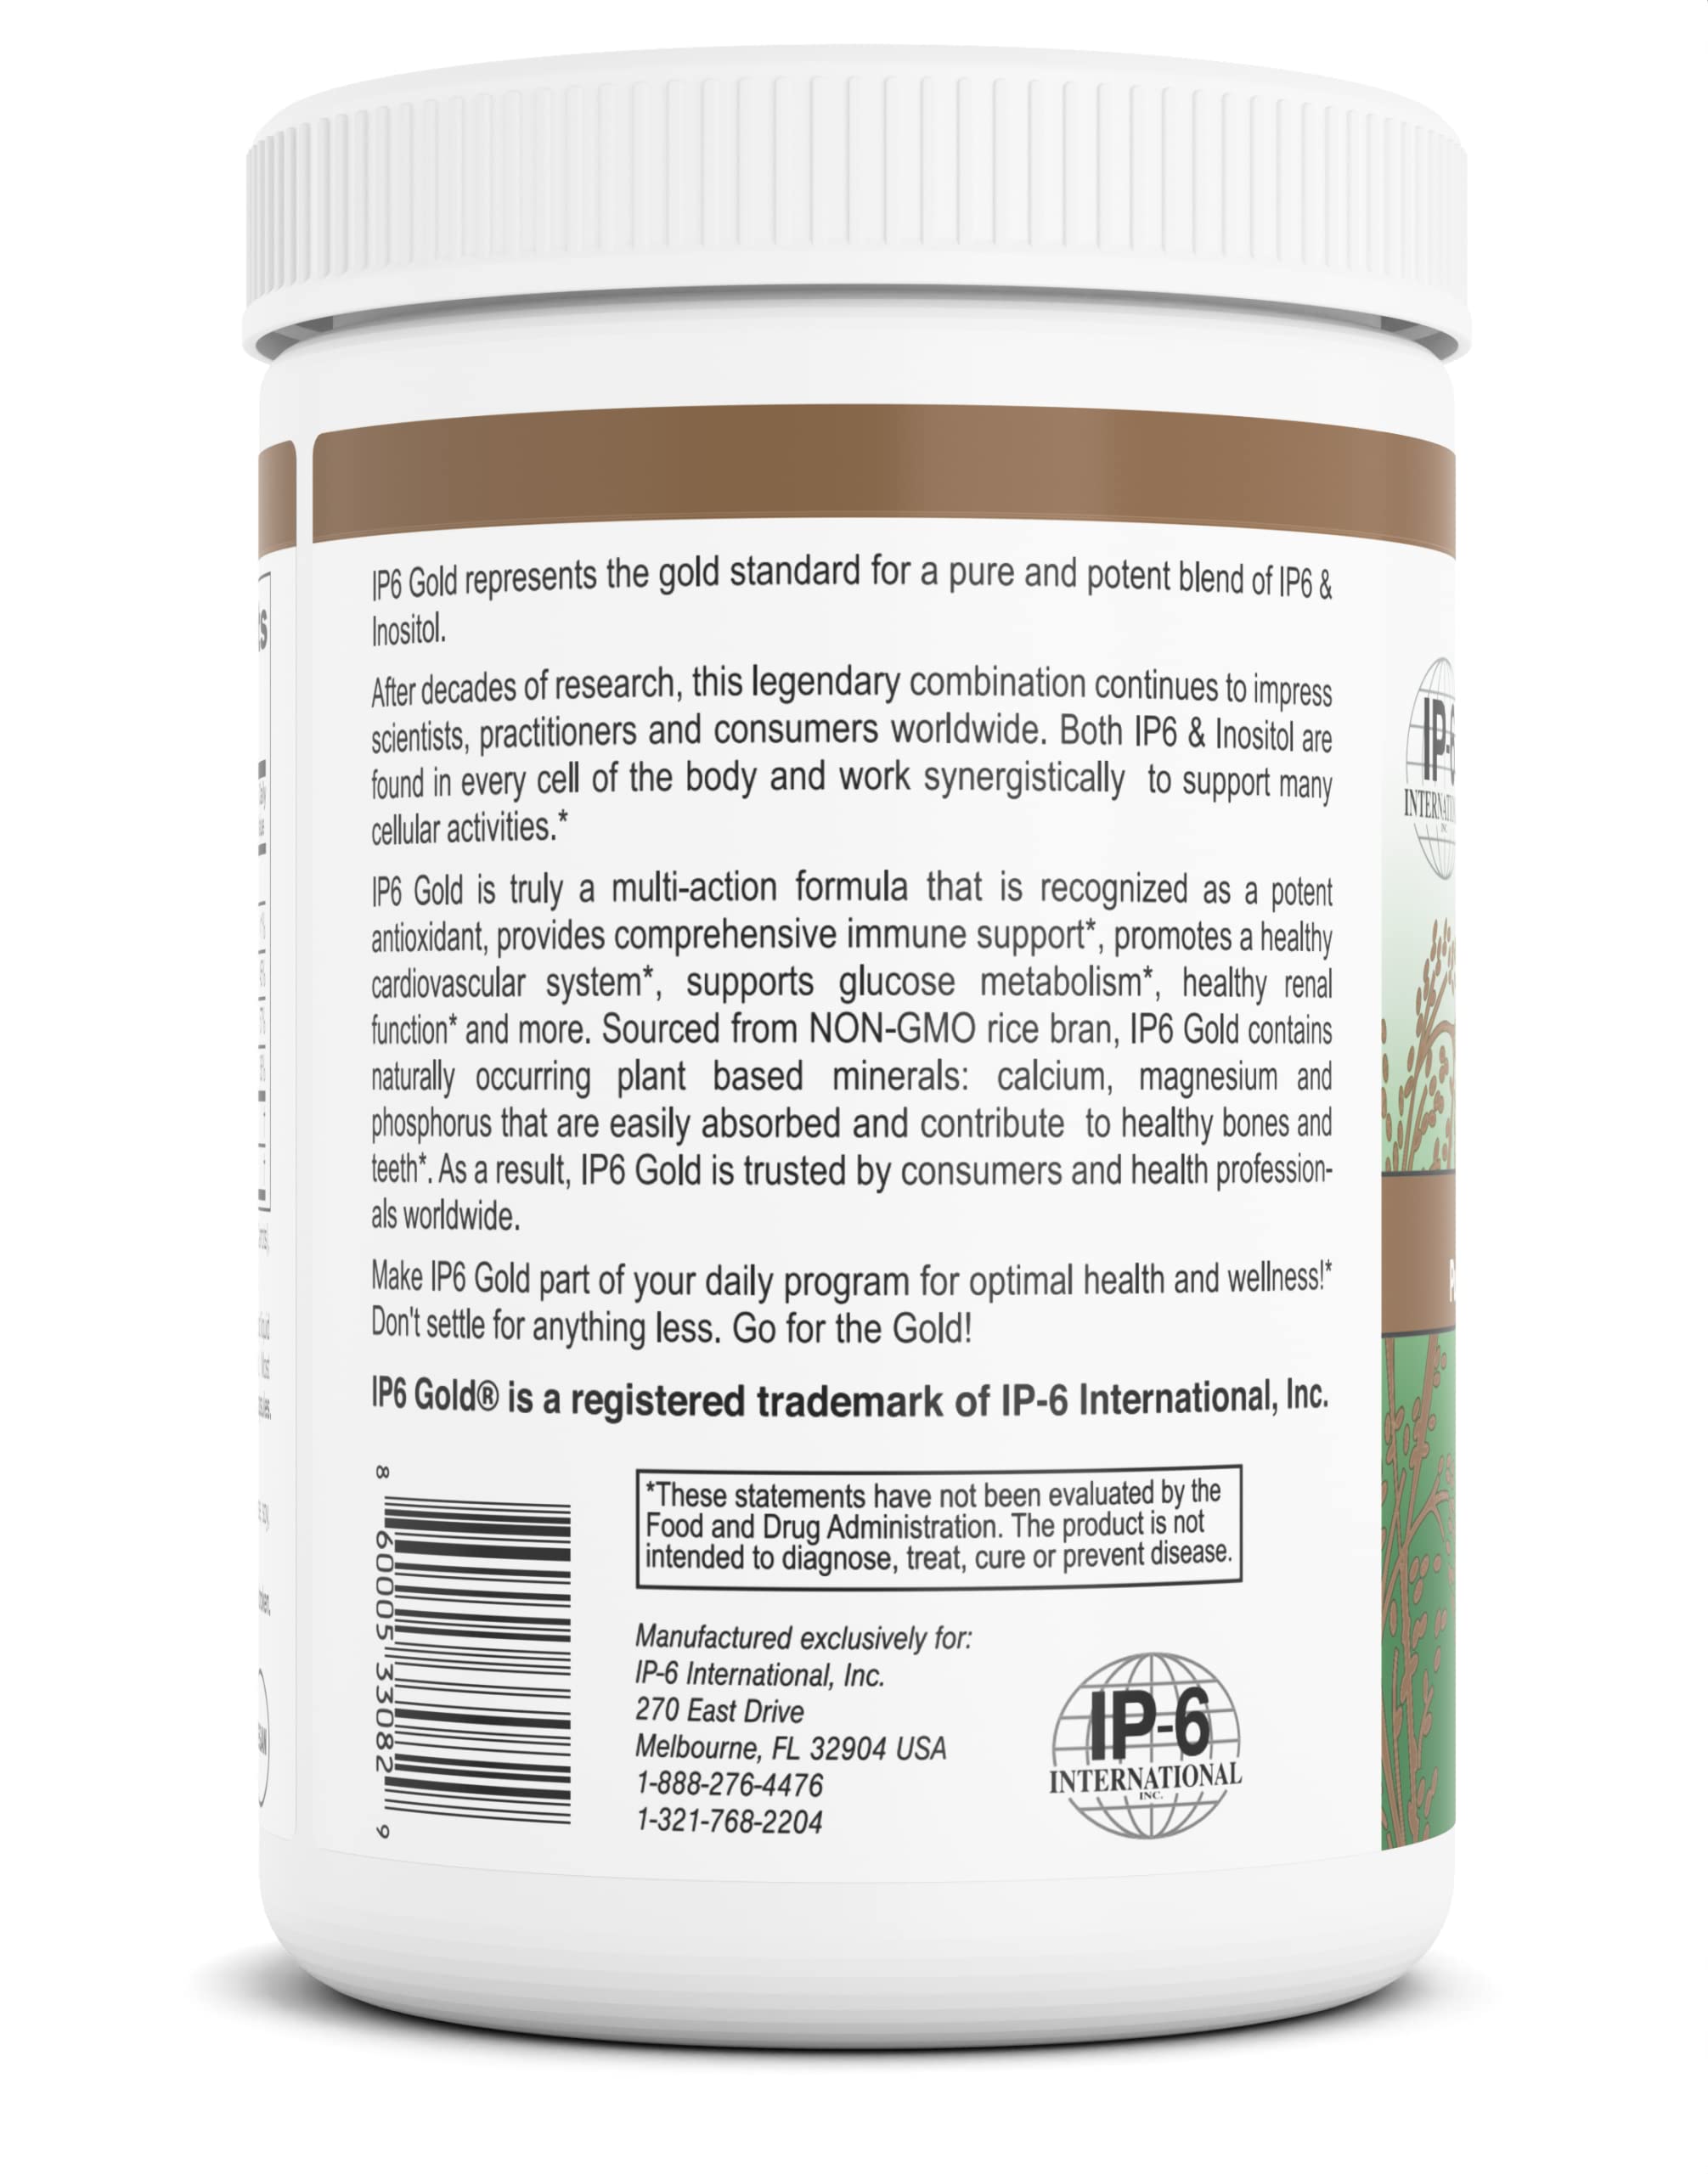 IP-6 Gold Powder with an Improved Mango Passionfruit Flavor, 60 Servings